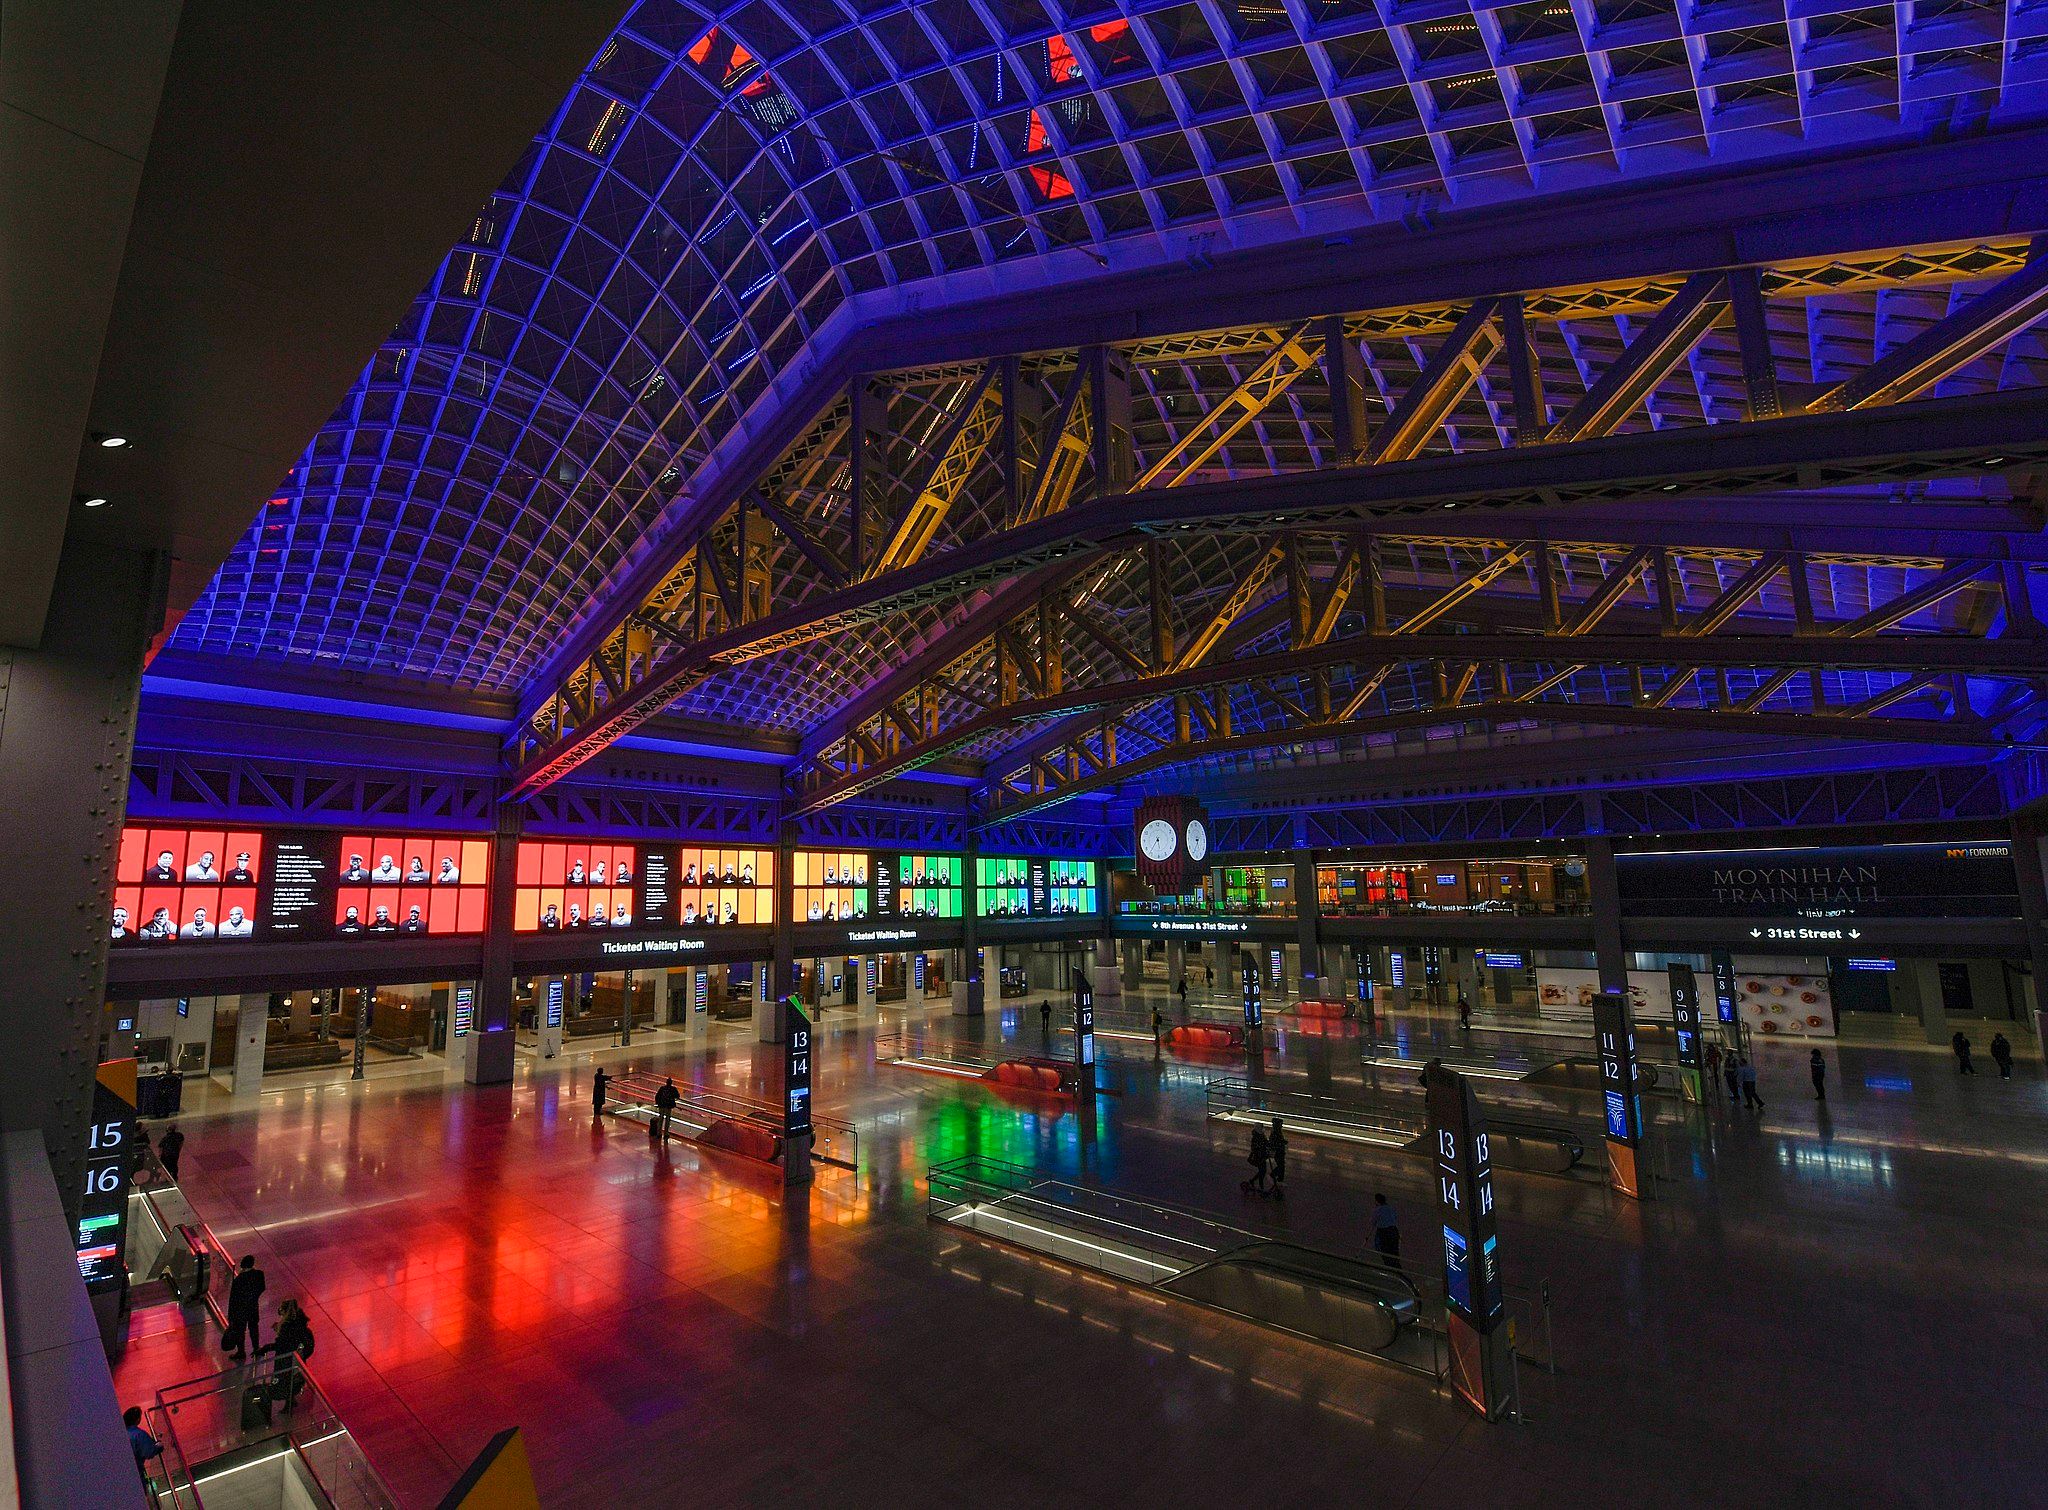 Interior of Penn Station lit in rainbow colors at night